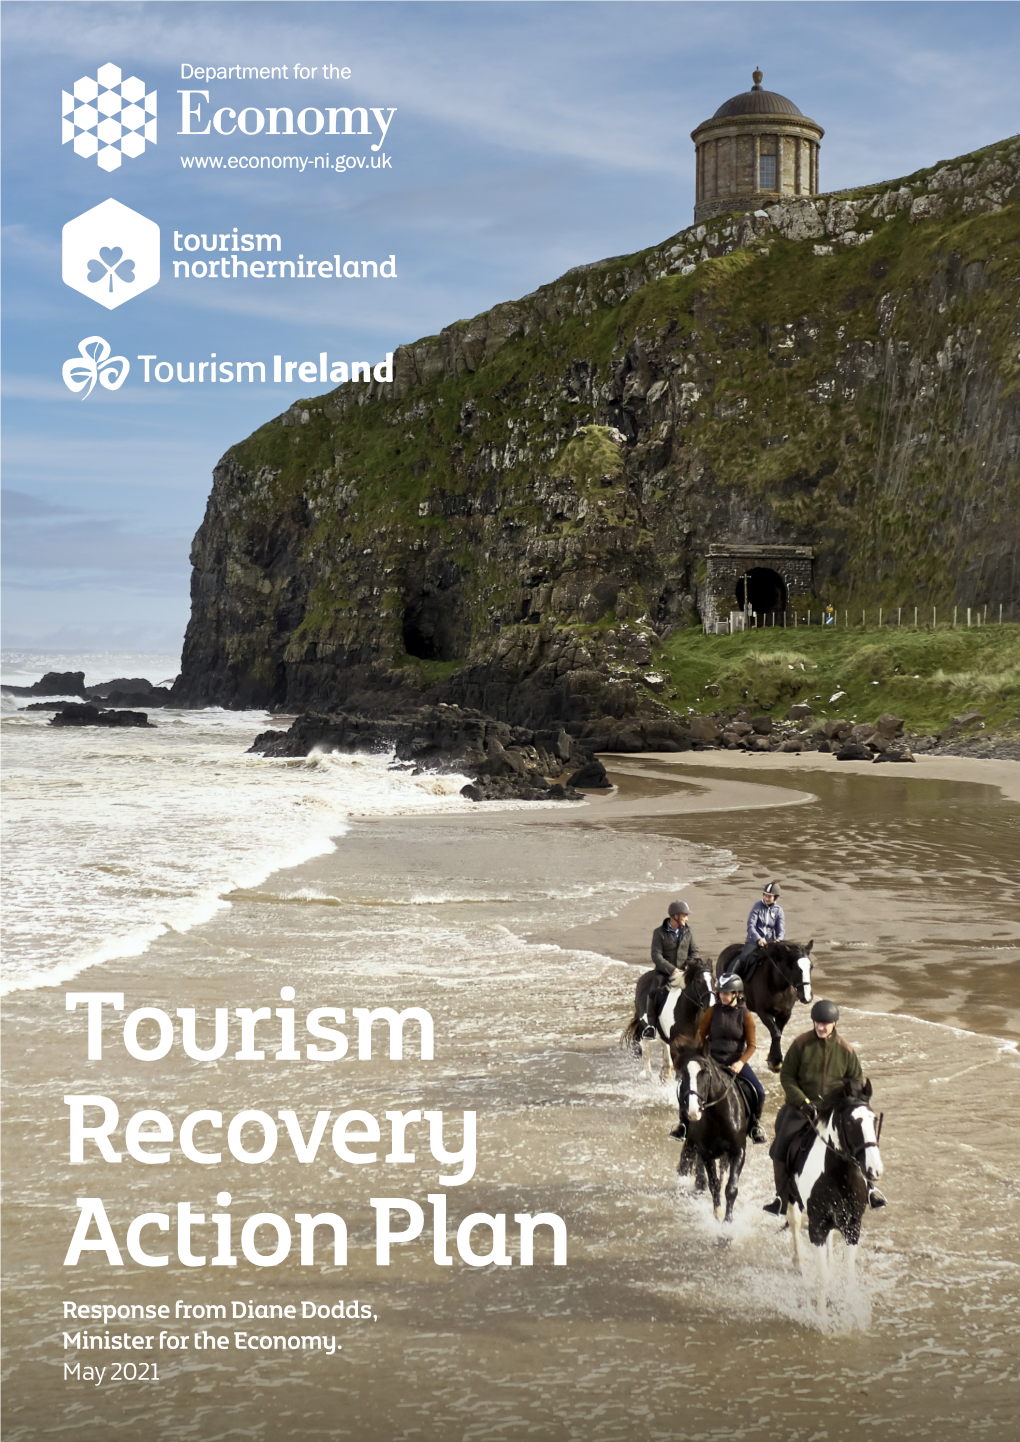 Tourism Recovery Action Plan Response from Diane Dodds, Minister for the Economy